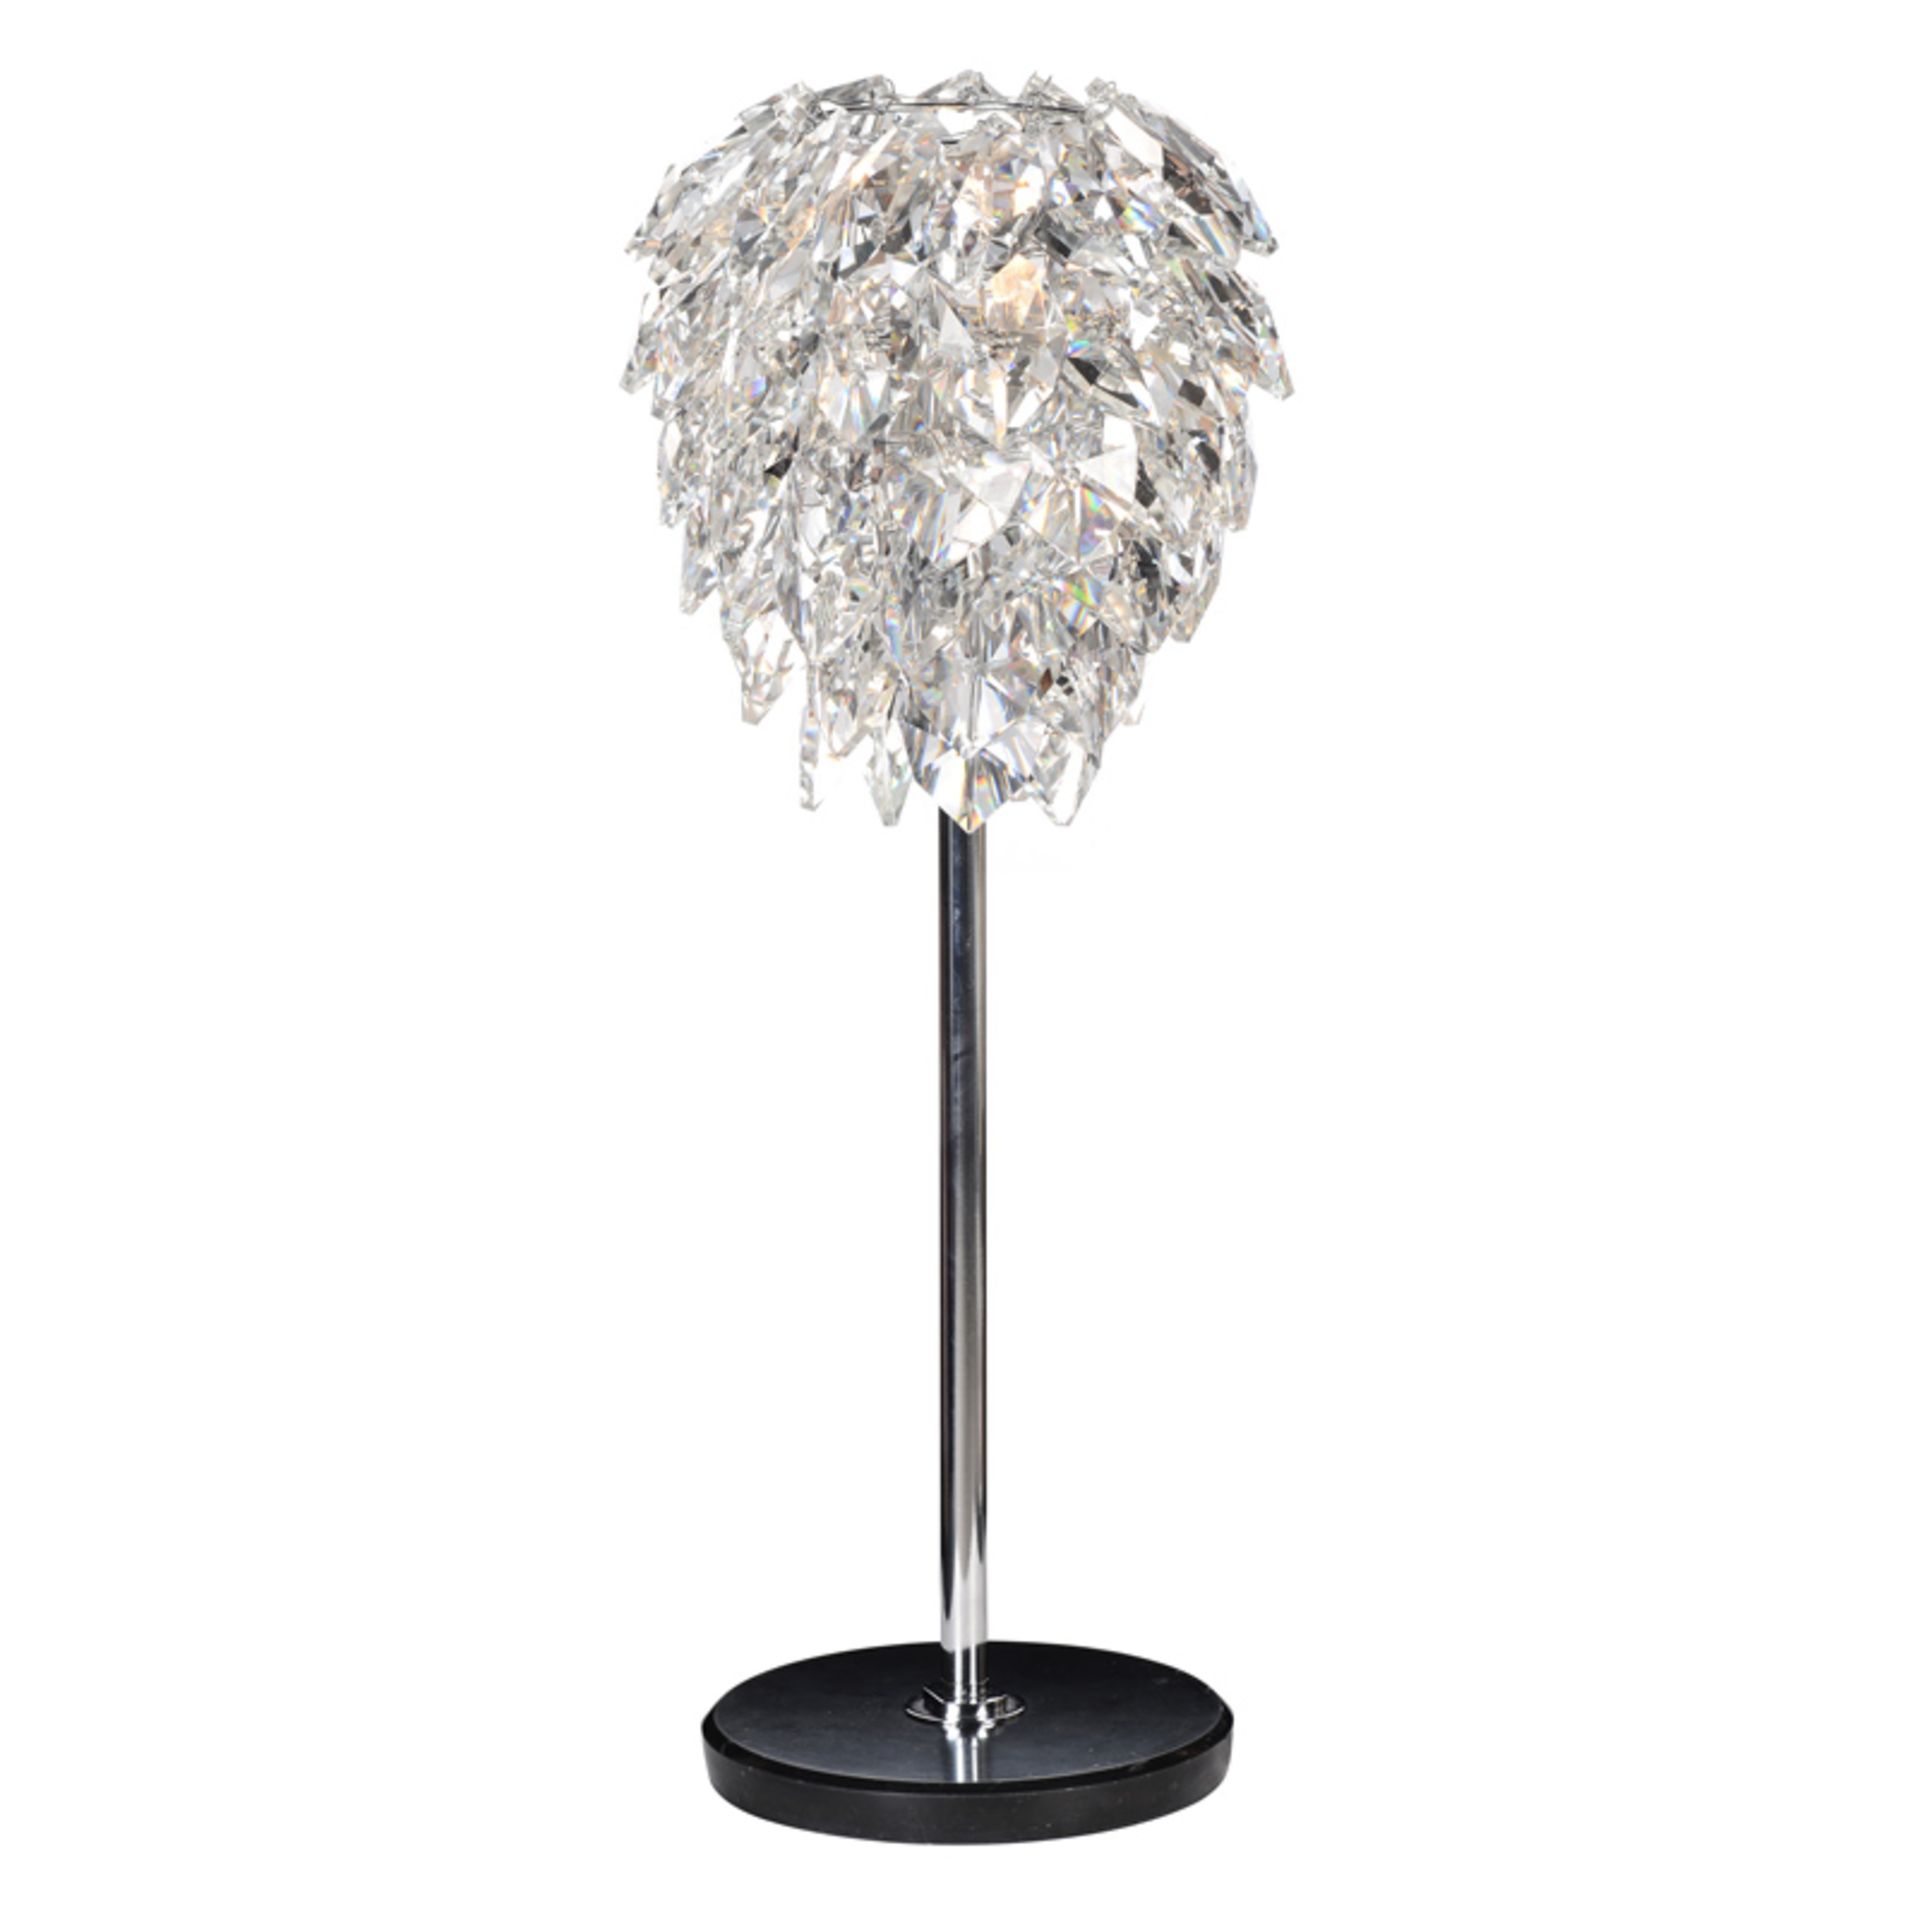 Pharaoh Petals Table Lamp (uk) Brilliant A Stunning Luminaire Petals Are Formed By Lenses That